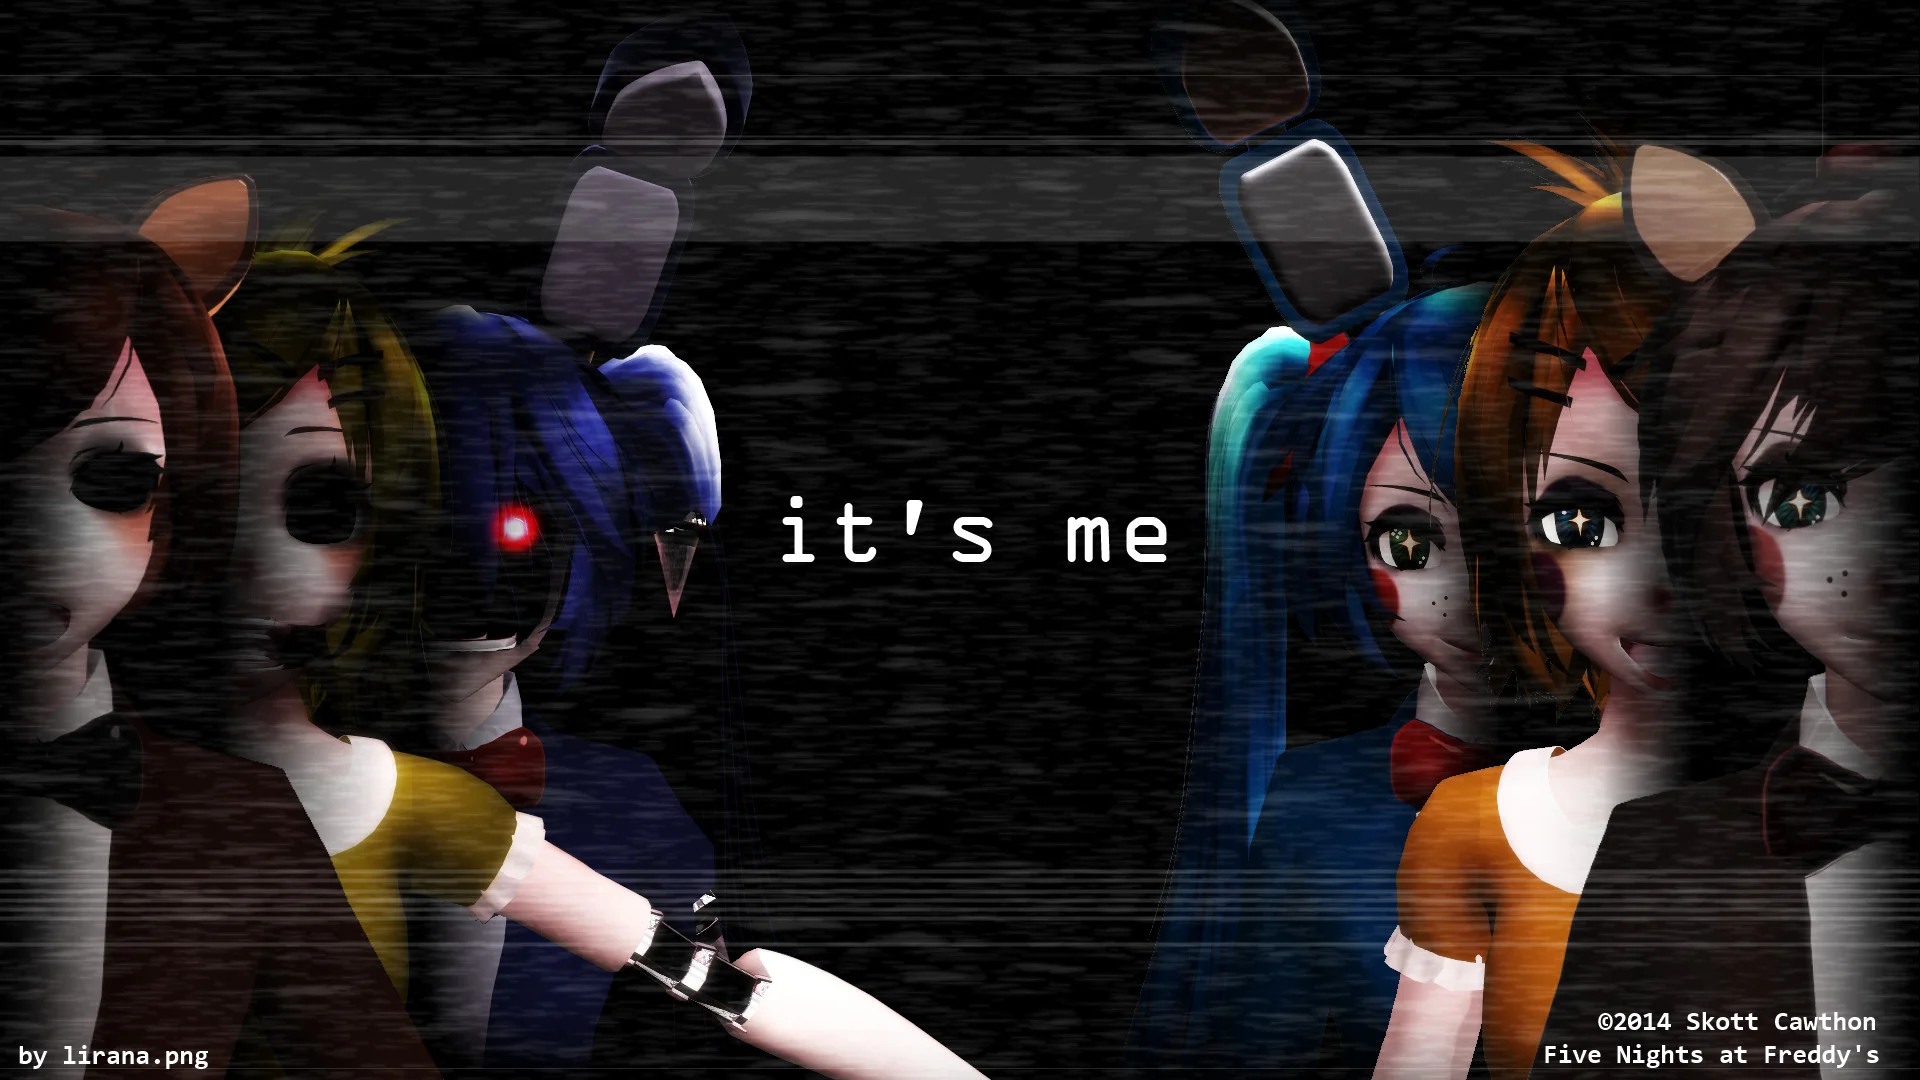 … MMD Five Night at Freddy's vocaloid edit wallpaper by liranaPNG